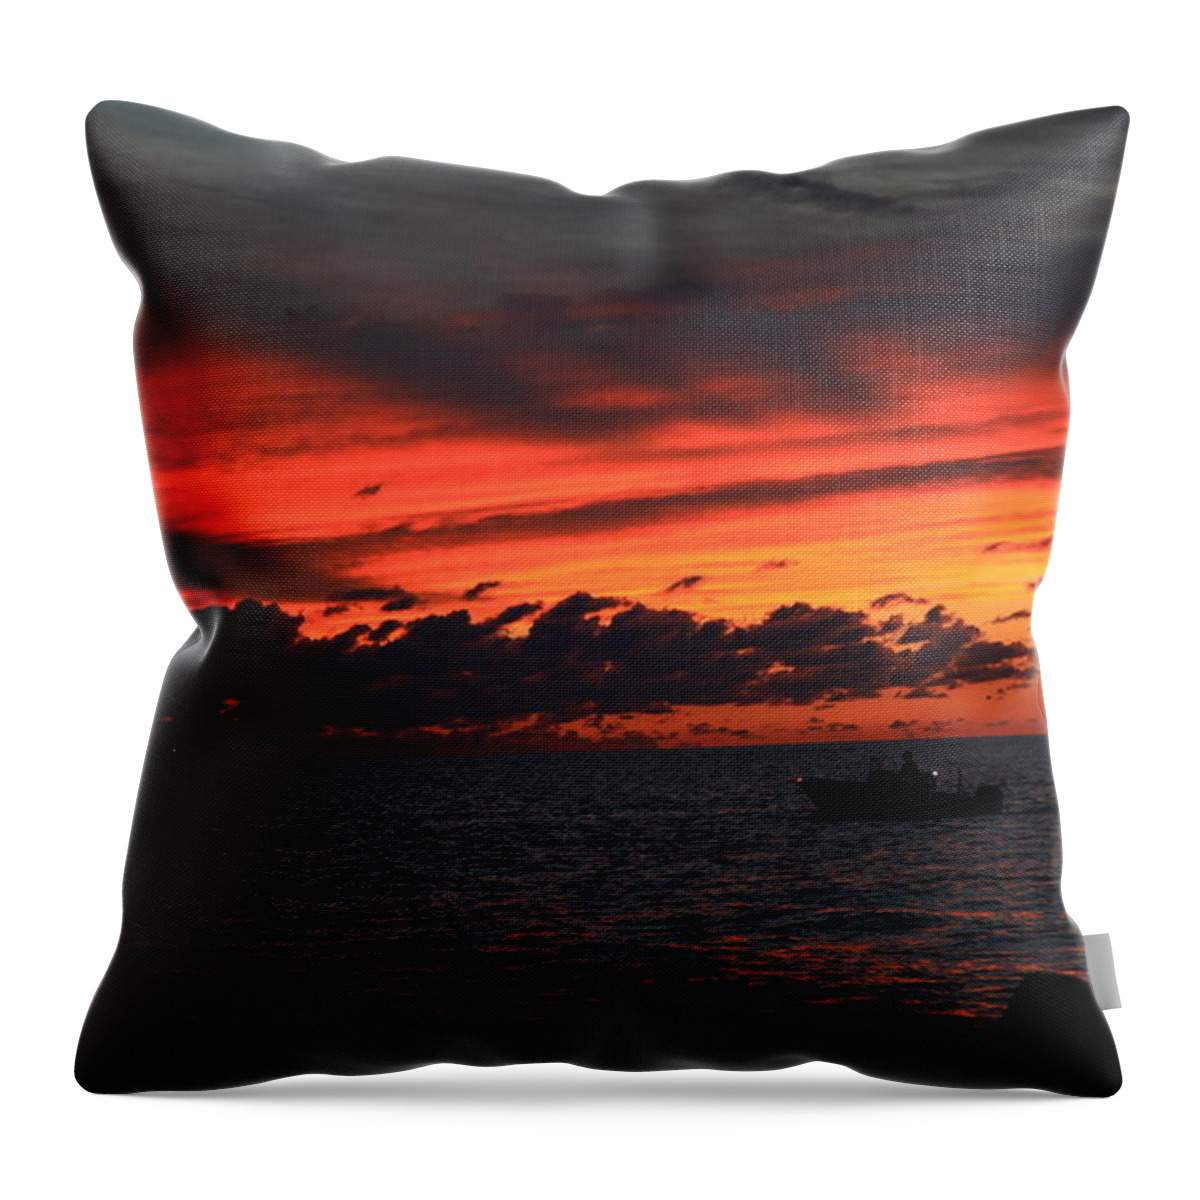 Water Throw Pillow featuring the photograph Mystical Sunset by Ee Photography